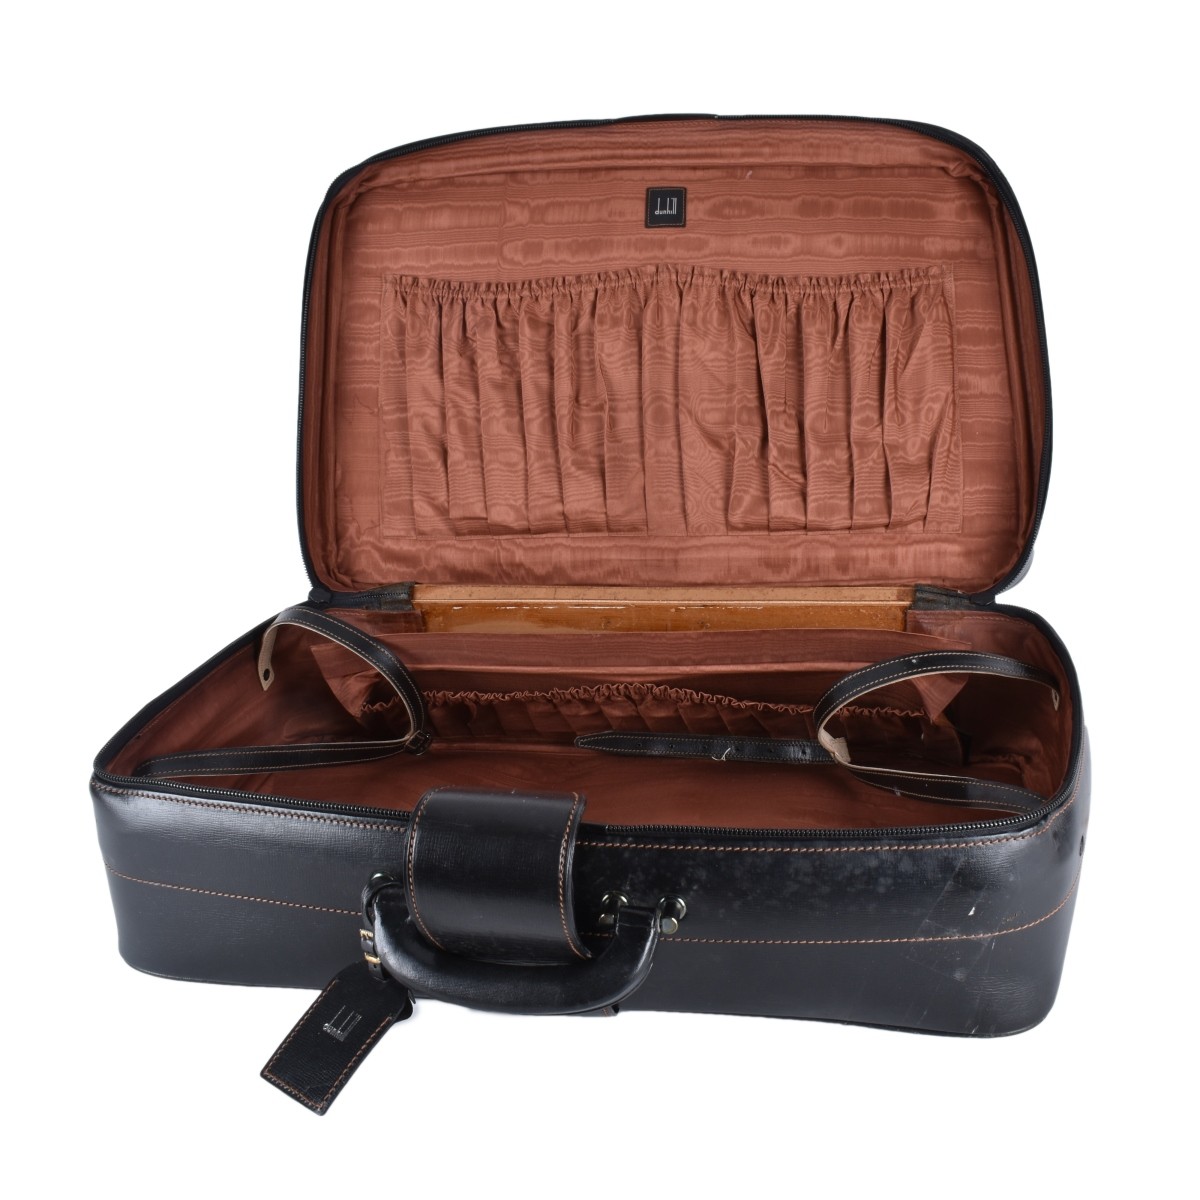 Dunhill Suitcase